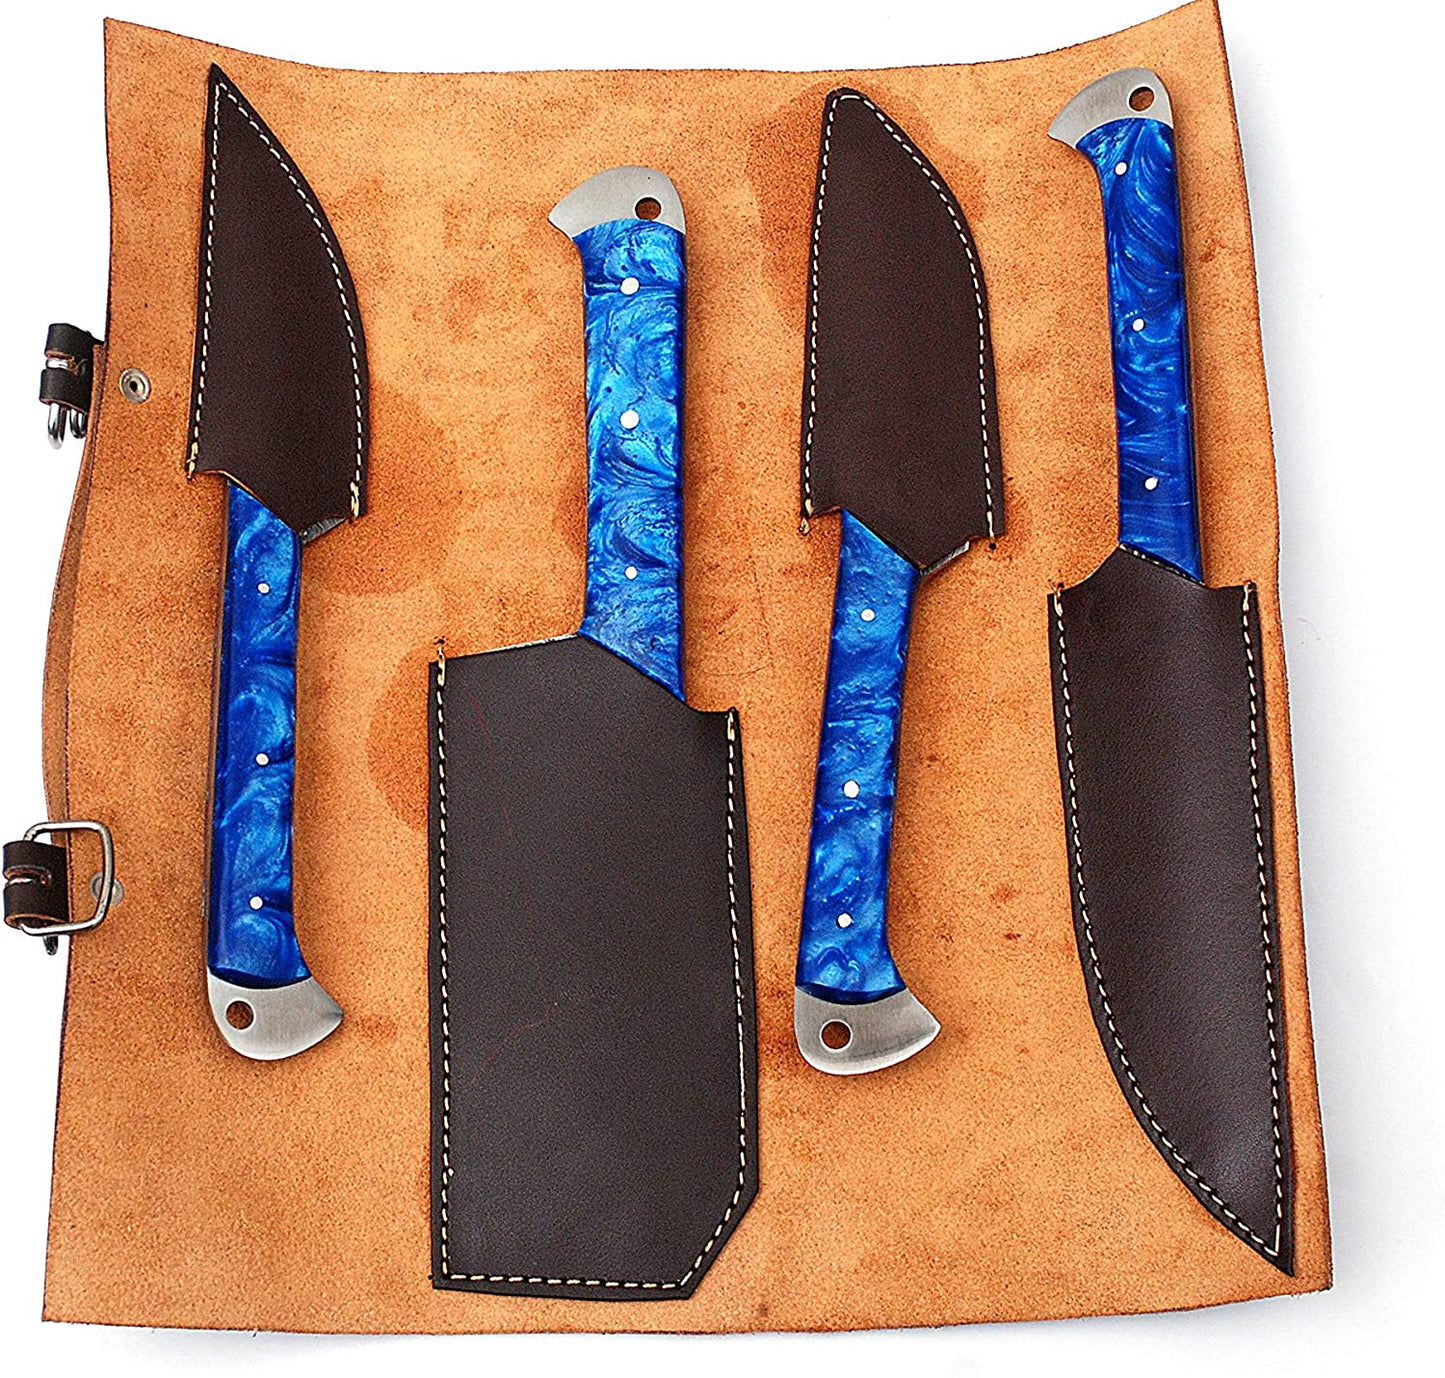 Handmade Damascus Chef set of 4Pcs With Leather Sheath, Damascus Knife Set, Damascus Chef Knife, Kitchen Knife Set, Damascus Chef Set